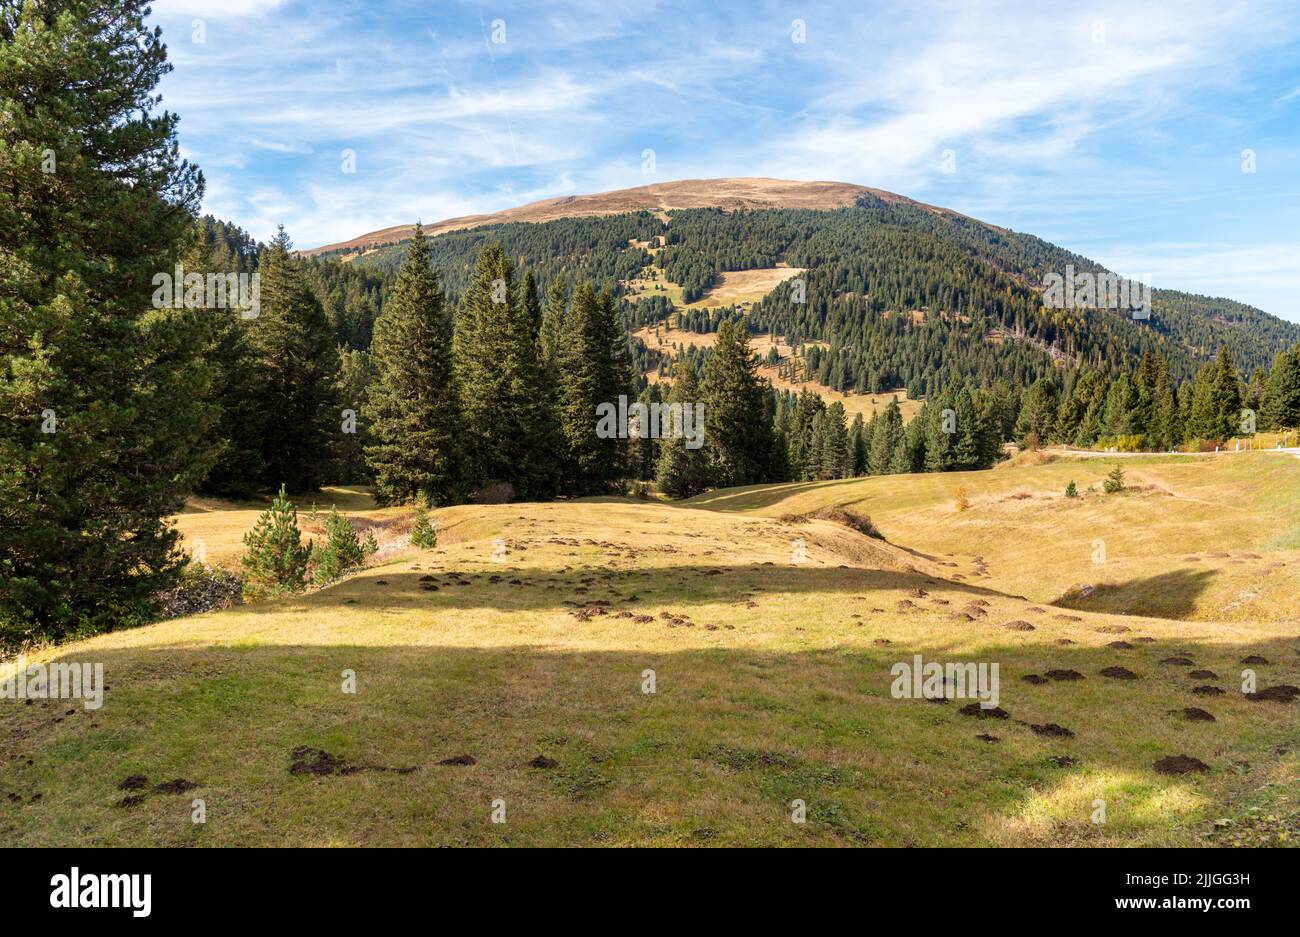 Landscape with Scots pine forests in the Puster valley of Italian Dolomites Alps, South Tyrol, Italy Stock Photo